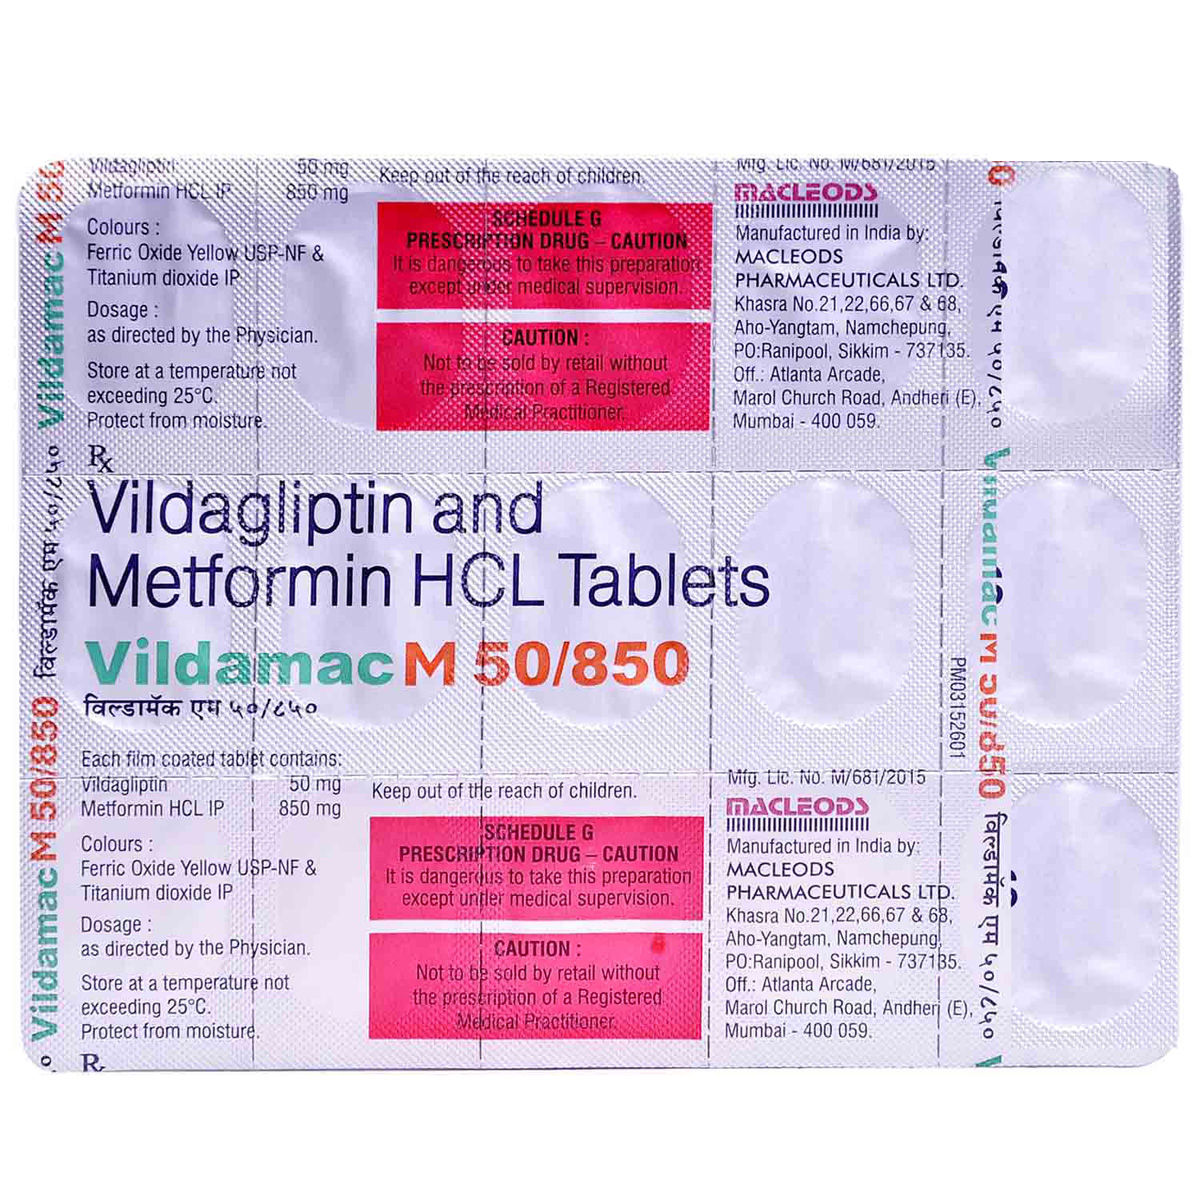 Vildamac M 50/850 Tablet 15's Price, Uses, Side Effects, Composition ...